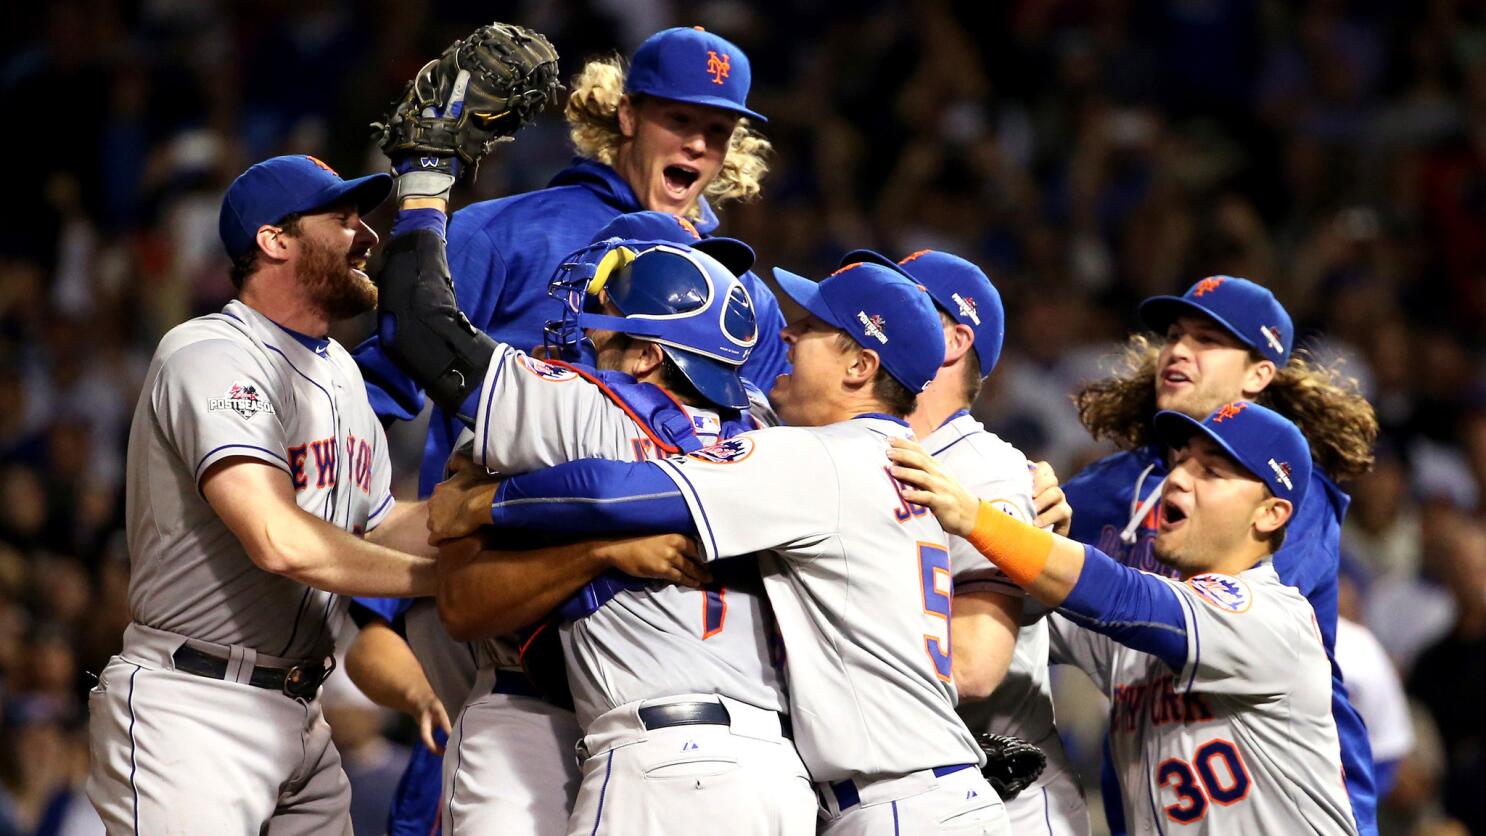 NLCS 2015: Noah Syndergaard to pitch Game 2 for Mets